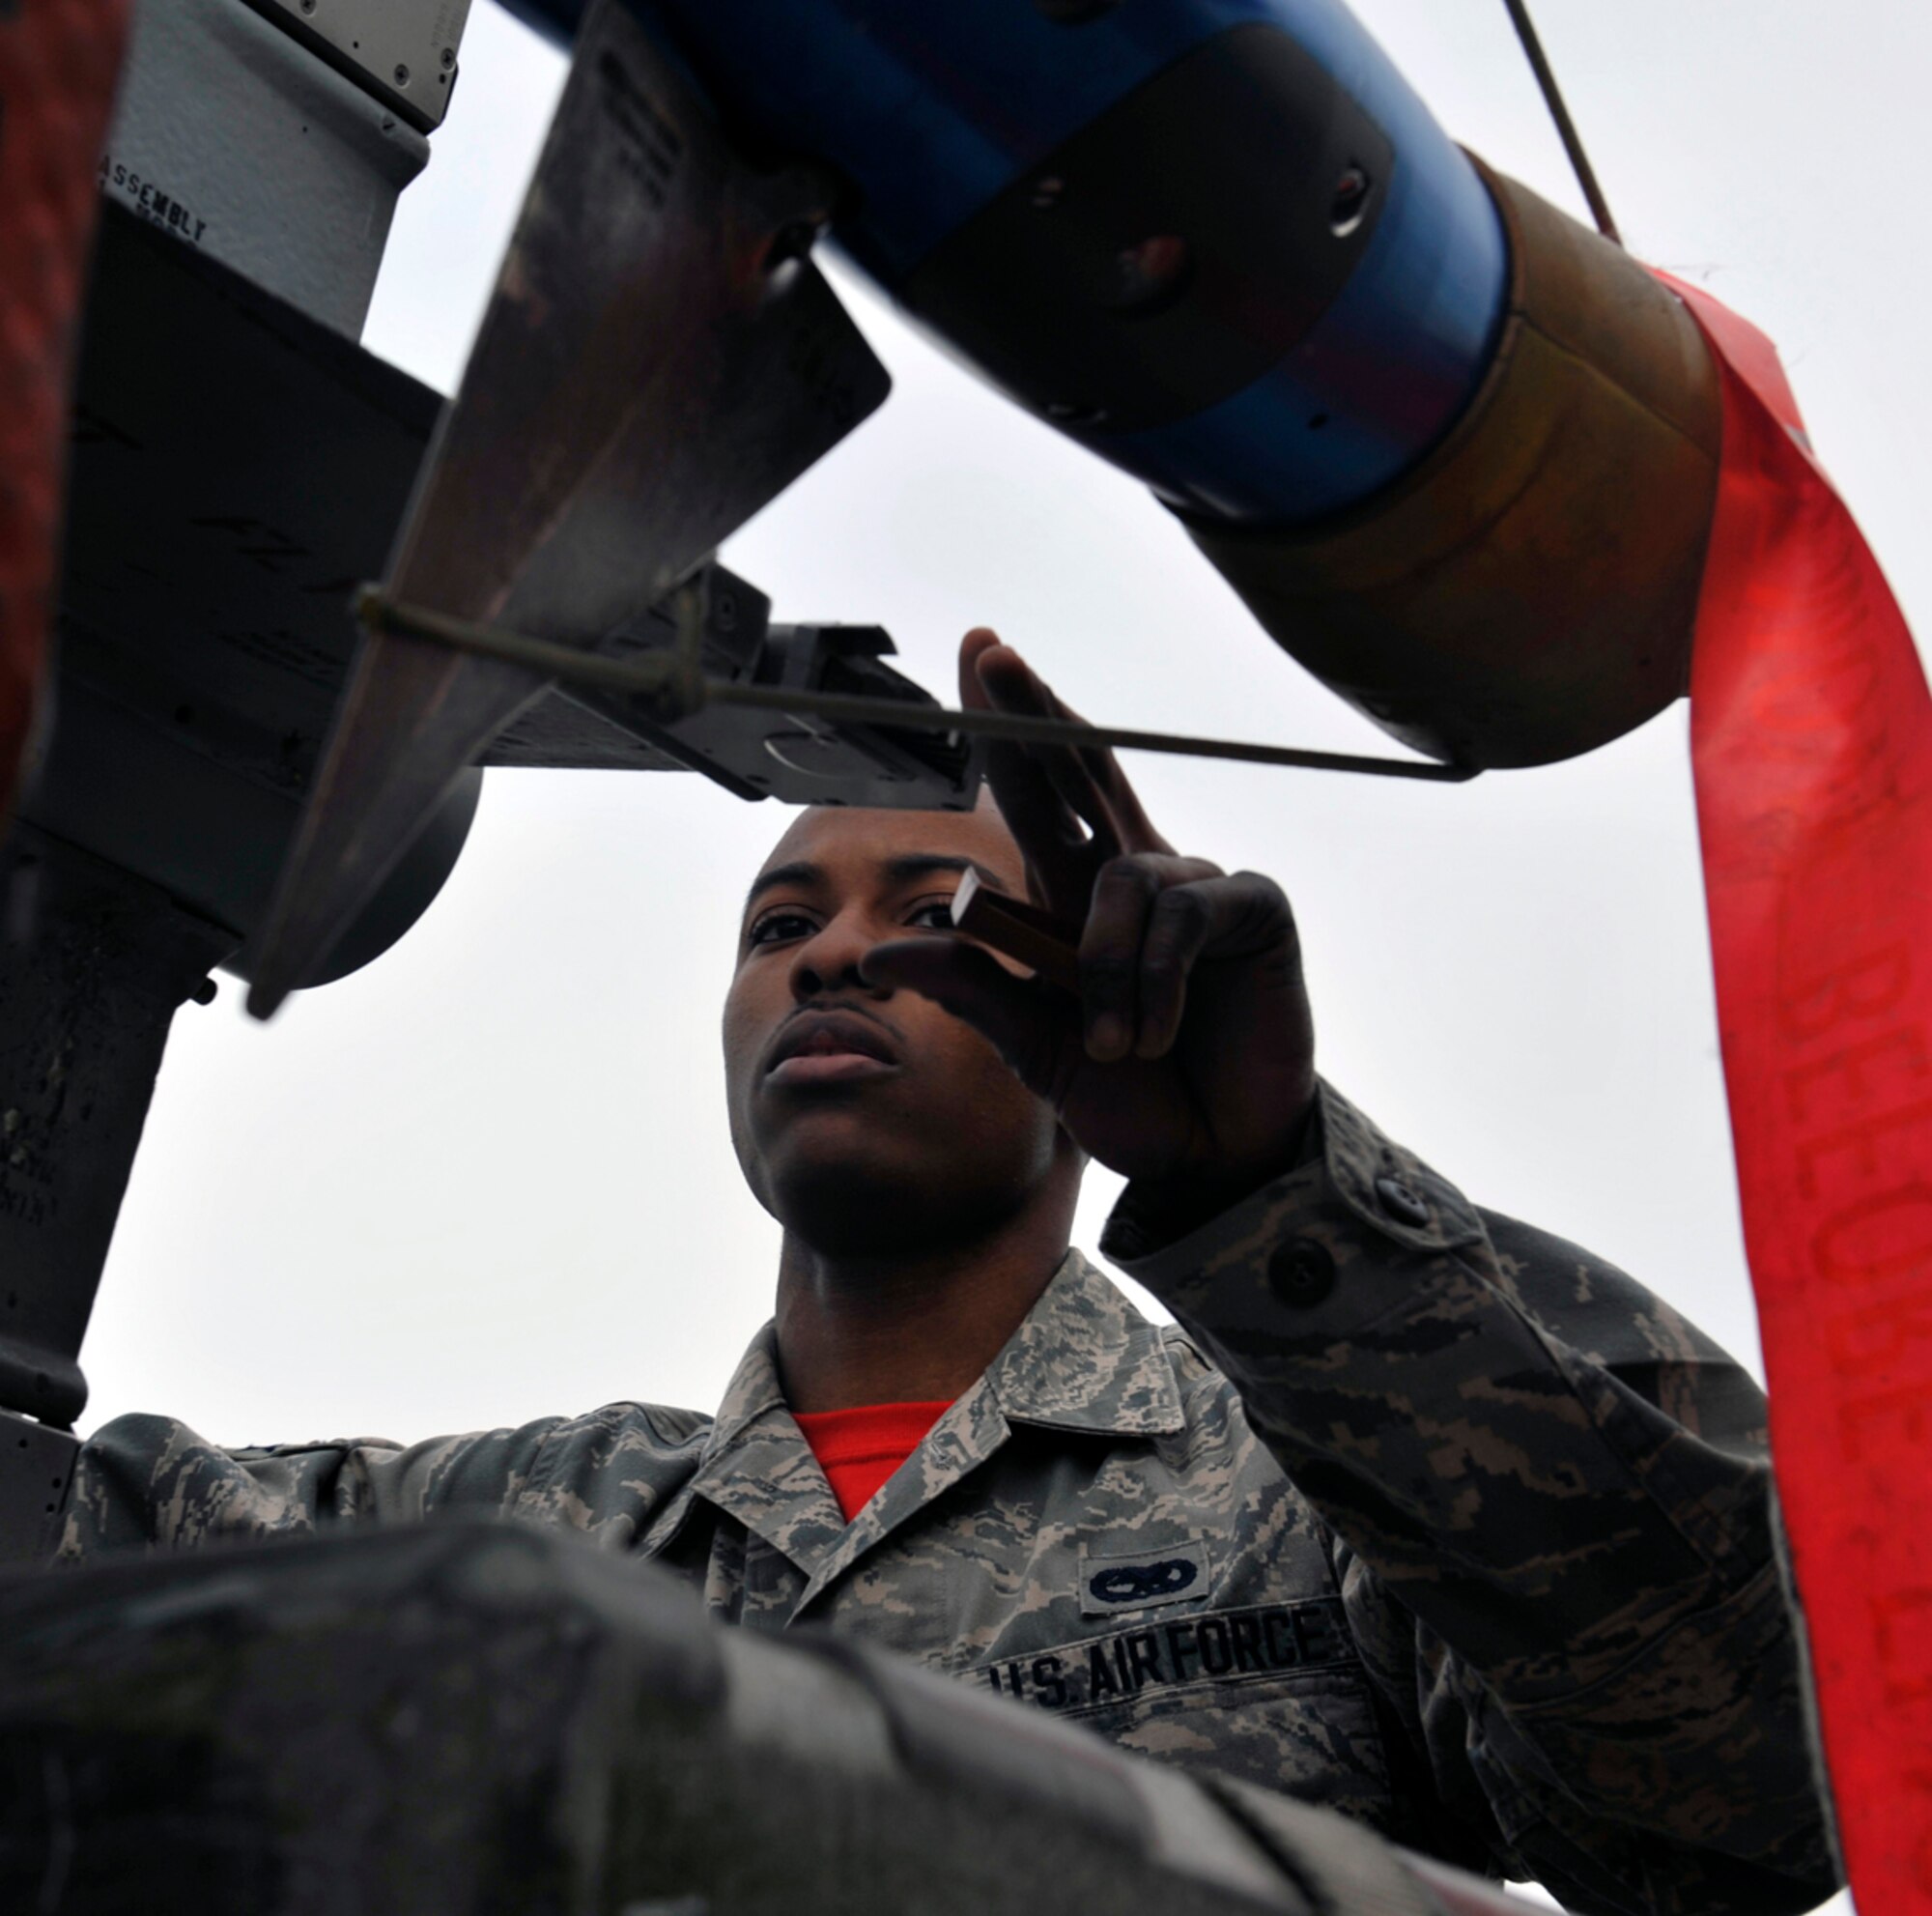 Airman 1st Class Deangelo Hamilton, 90th Aircraft Maintenance Unit weapons load crew member, checks an AIM-9 Sidewinder missile during a quarterly 3rd Maintenance Group load crew competition on Joint Base Elmendorf-Richardson, Alaska, April 18, 2014. The mission of the load crew is to load munitions onto aircraft safely, efficiently and reliably. (U.S. Air Force photo/Airman 1st Class Tammie Ramsouer)